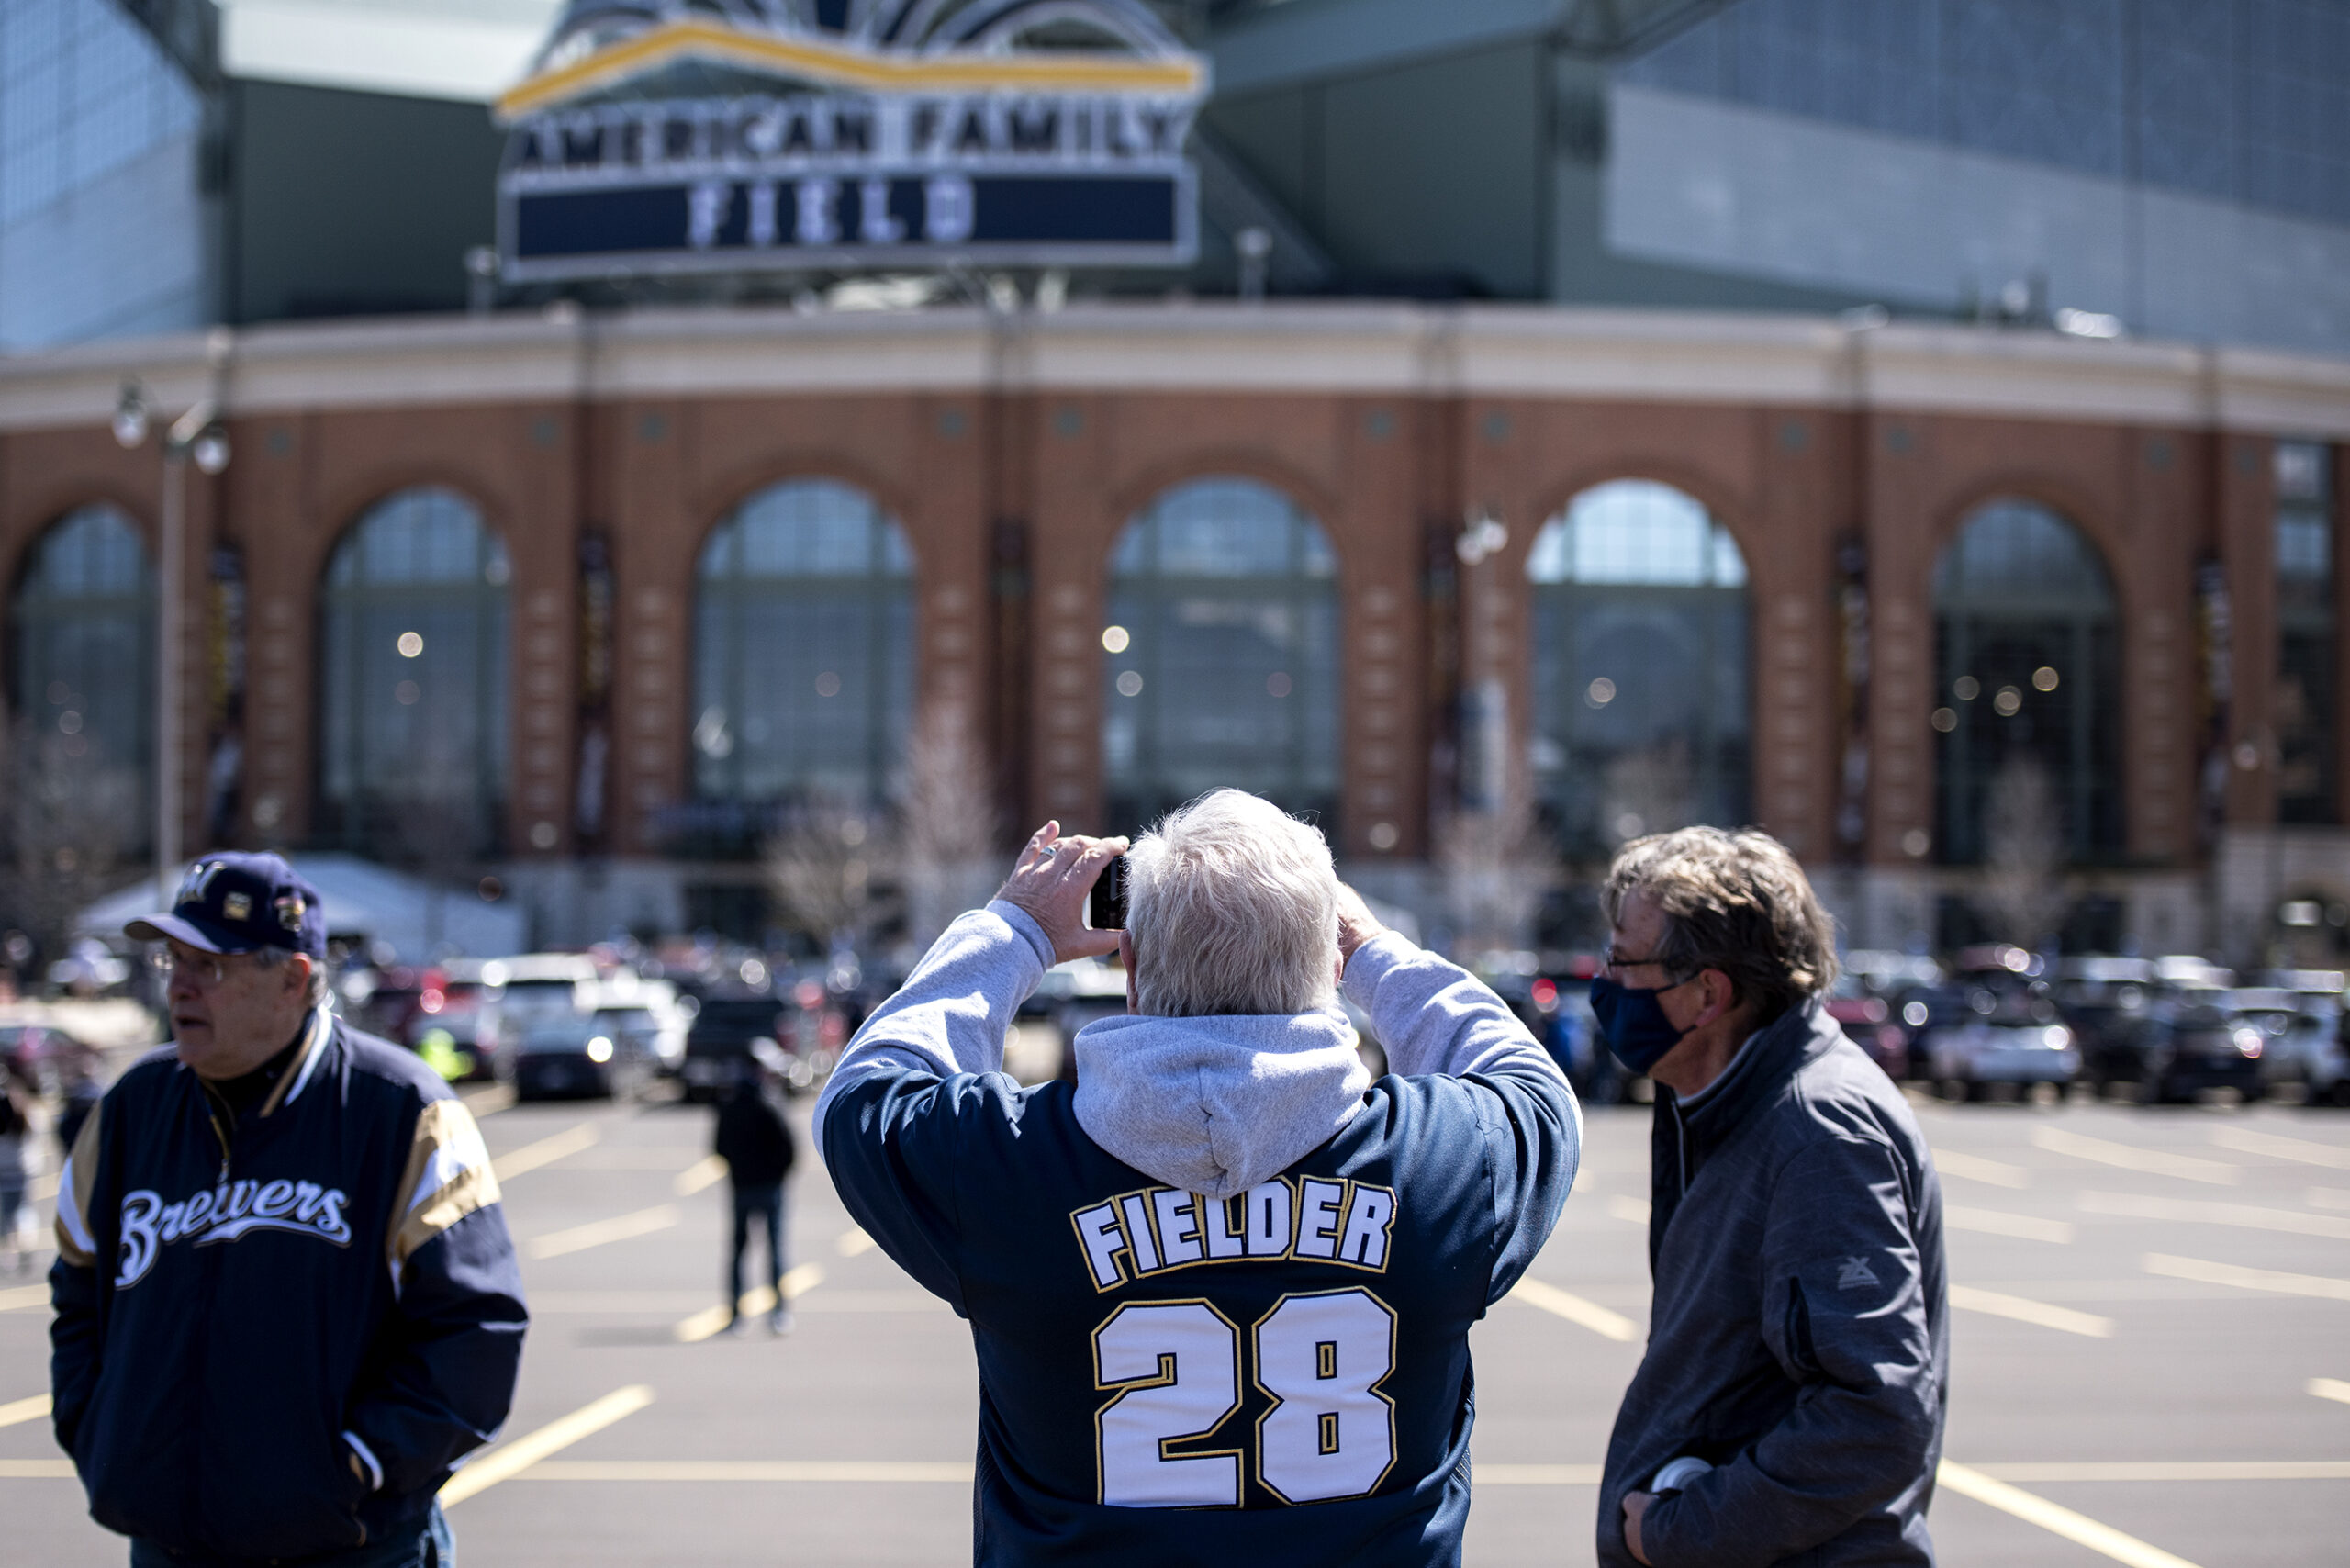 More changes likely on the way for Brewers stadium deal